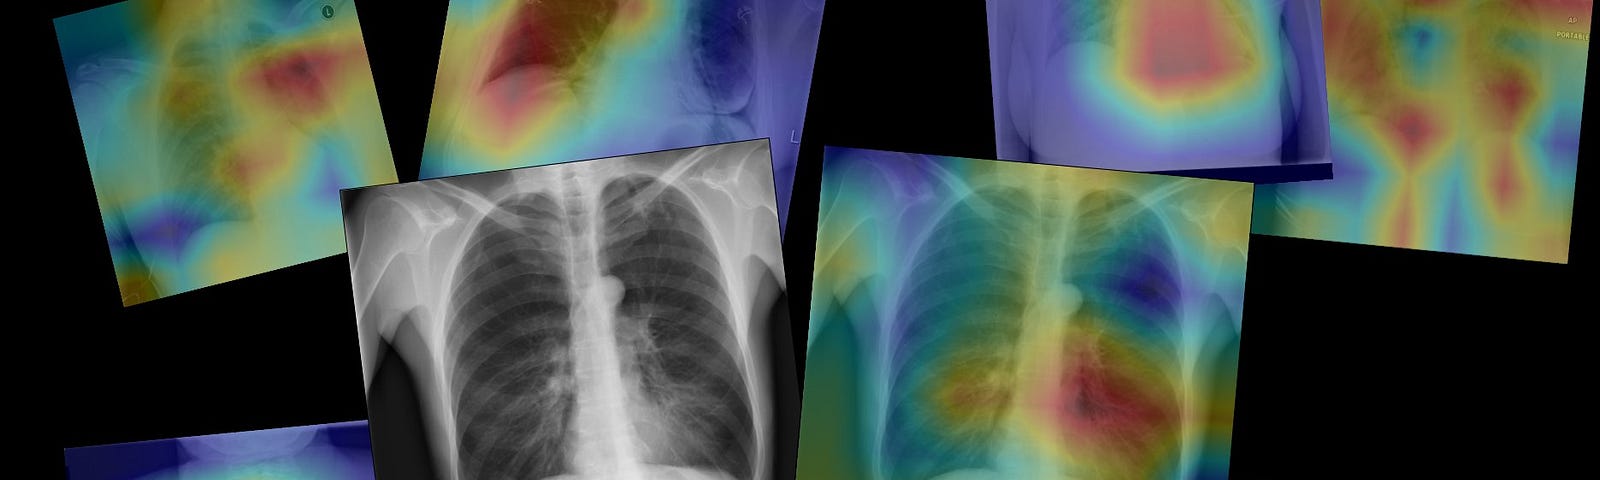 Different X-rays images with degrading color focus on a possible lesions in the thoraxic part